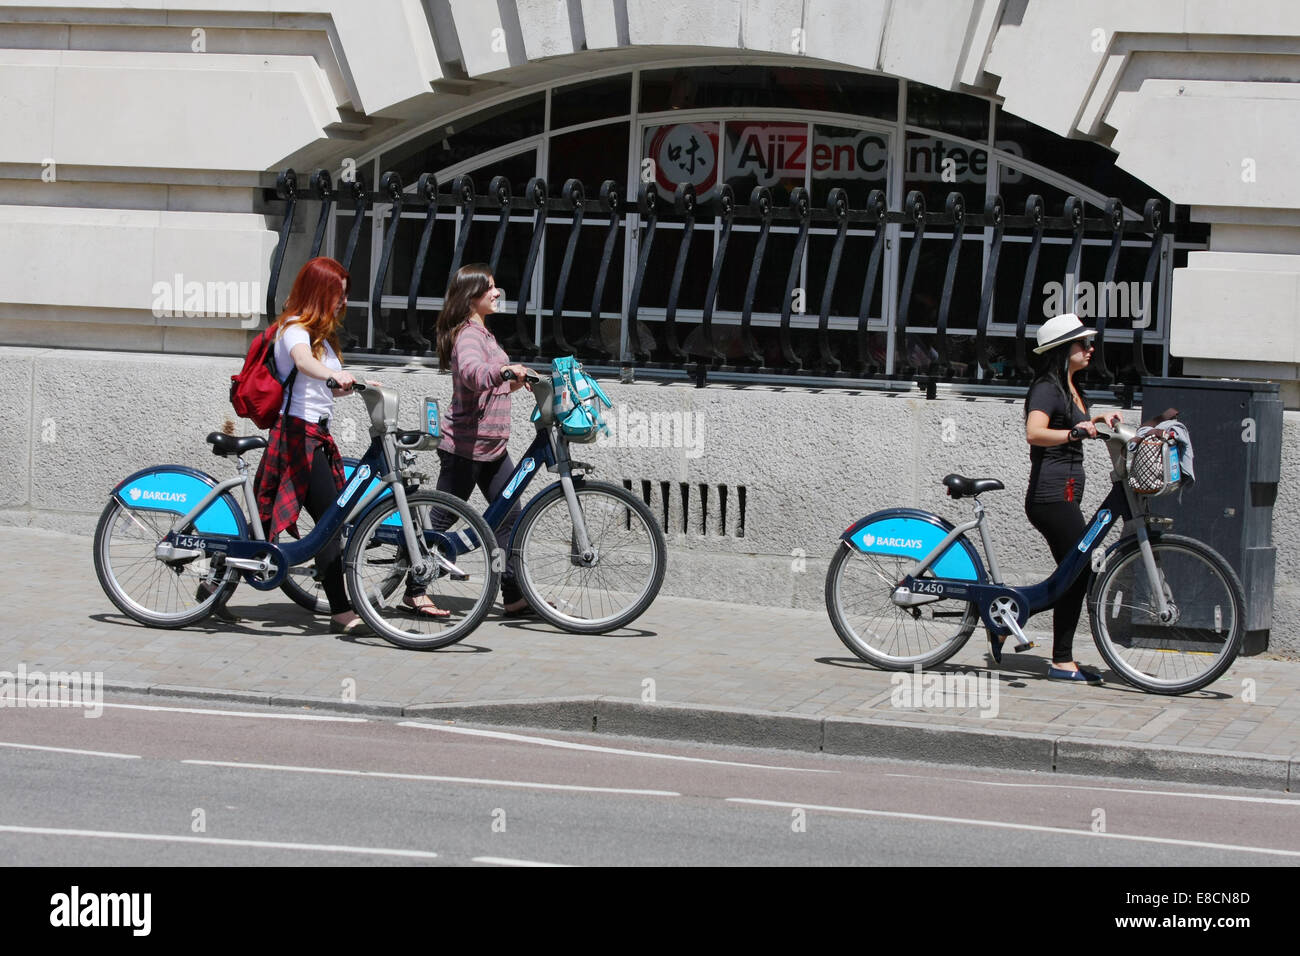 Three females walking with their cycles along a London street Stock Photo